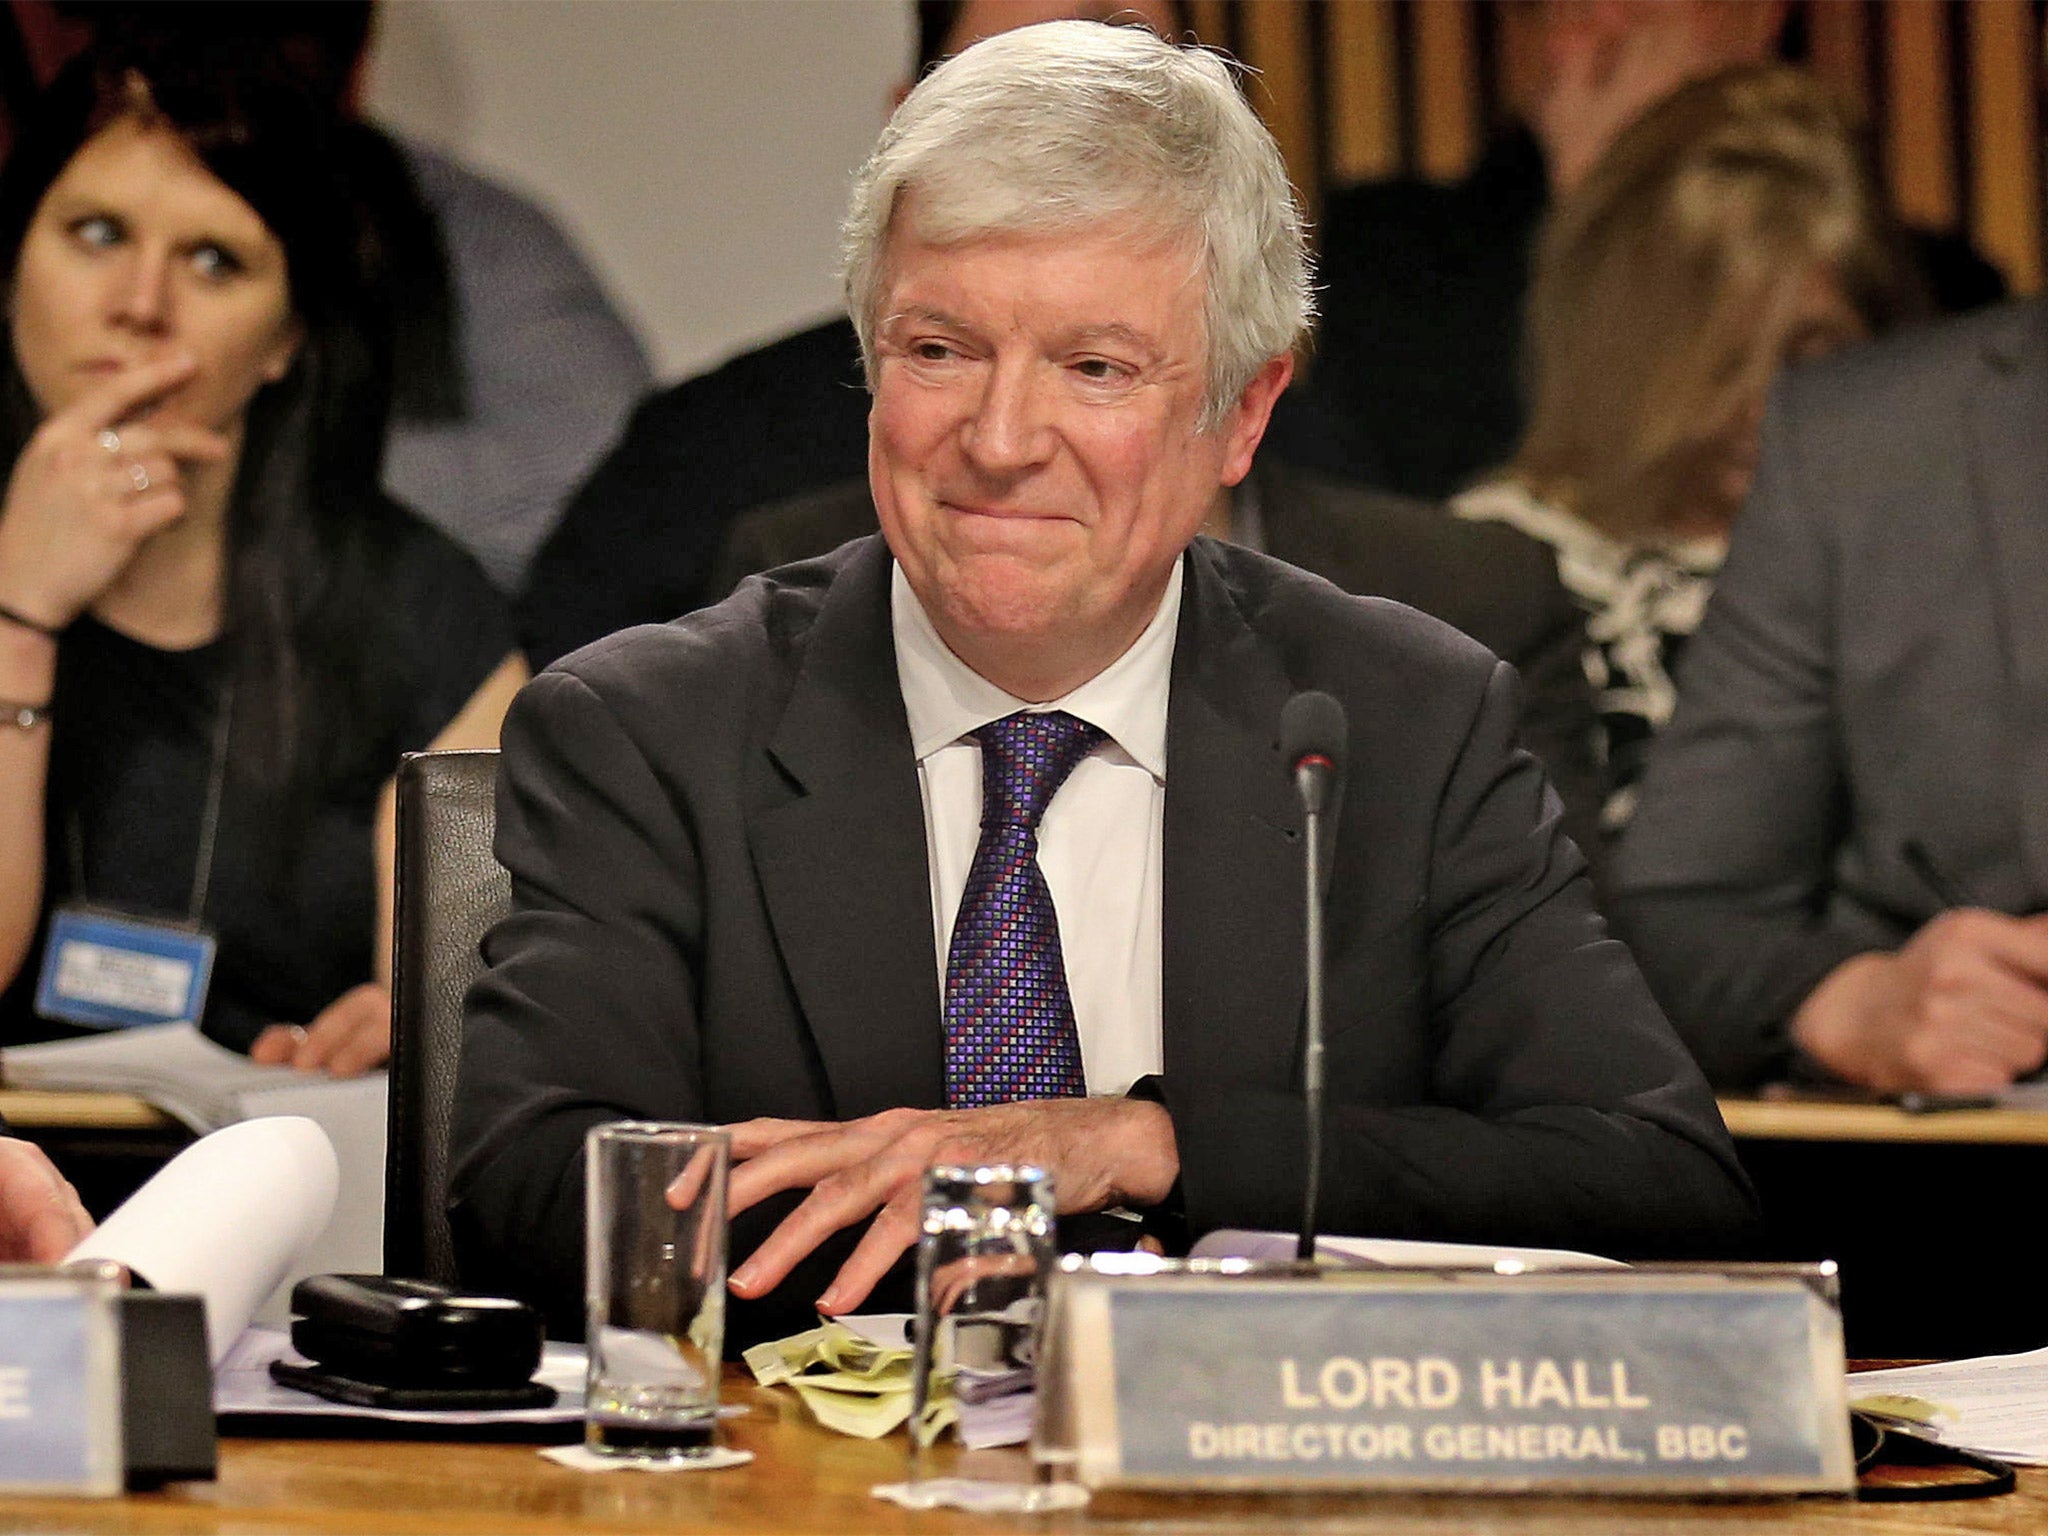 BBC Director-General Lord Hall answers questions in front of the Education and Culture Committee at the Scottish Parliament in Edinburgh